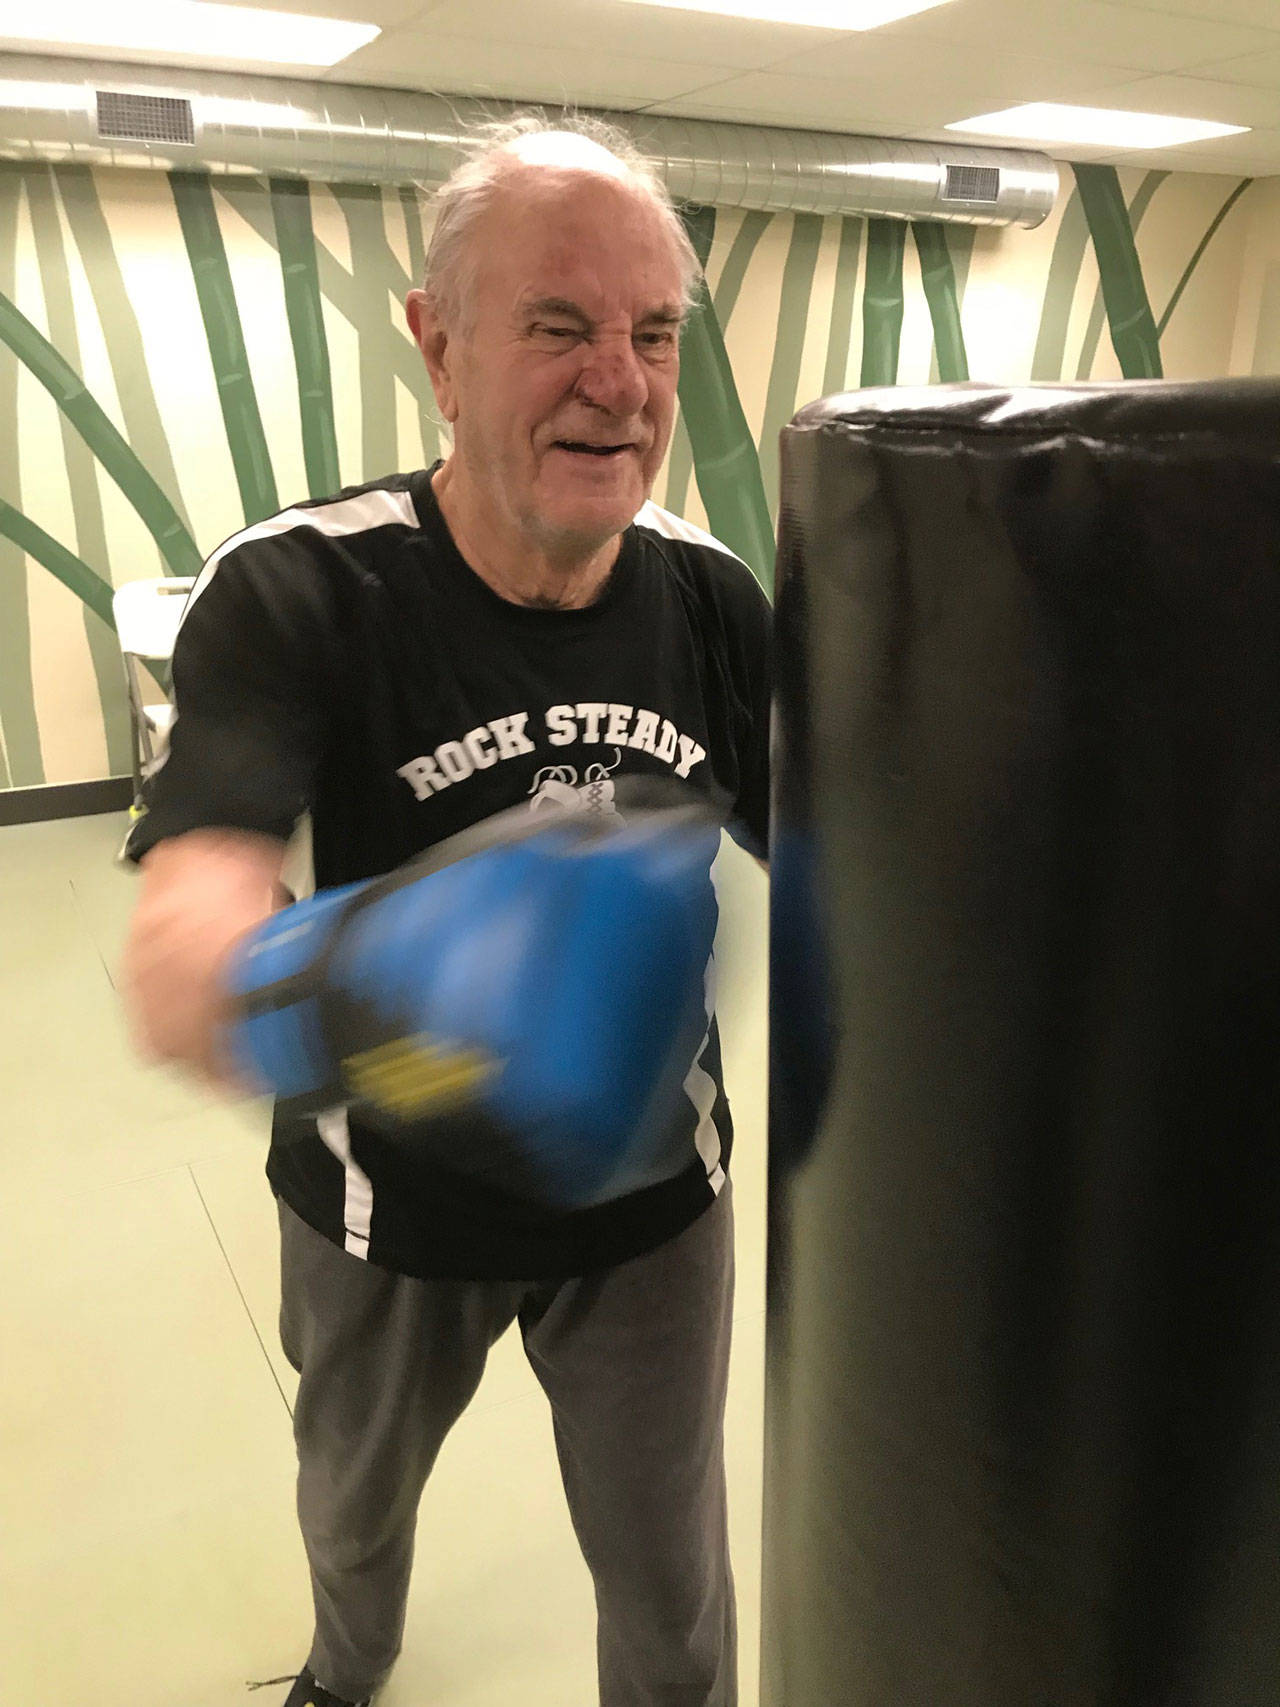 Ted Heikell, 79, of Renton, throws a punch at a bag during a Rock Steady Boxing workout at Longevita Pilates & Yoga Studio in Auburn last week. The therapy session is designed to help those combat symptoms of the disease. MARK KLAAS, Auburn Reporter